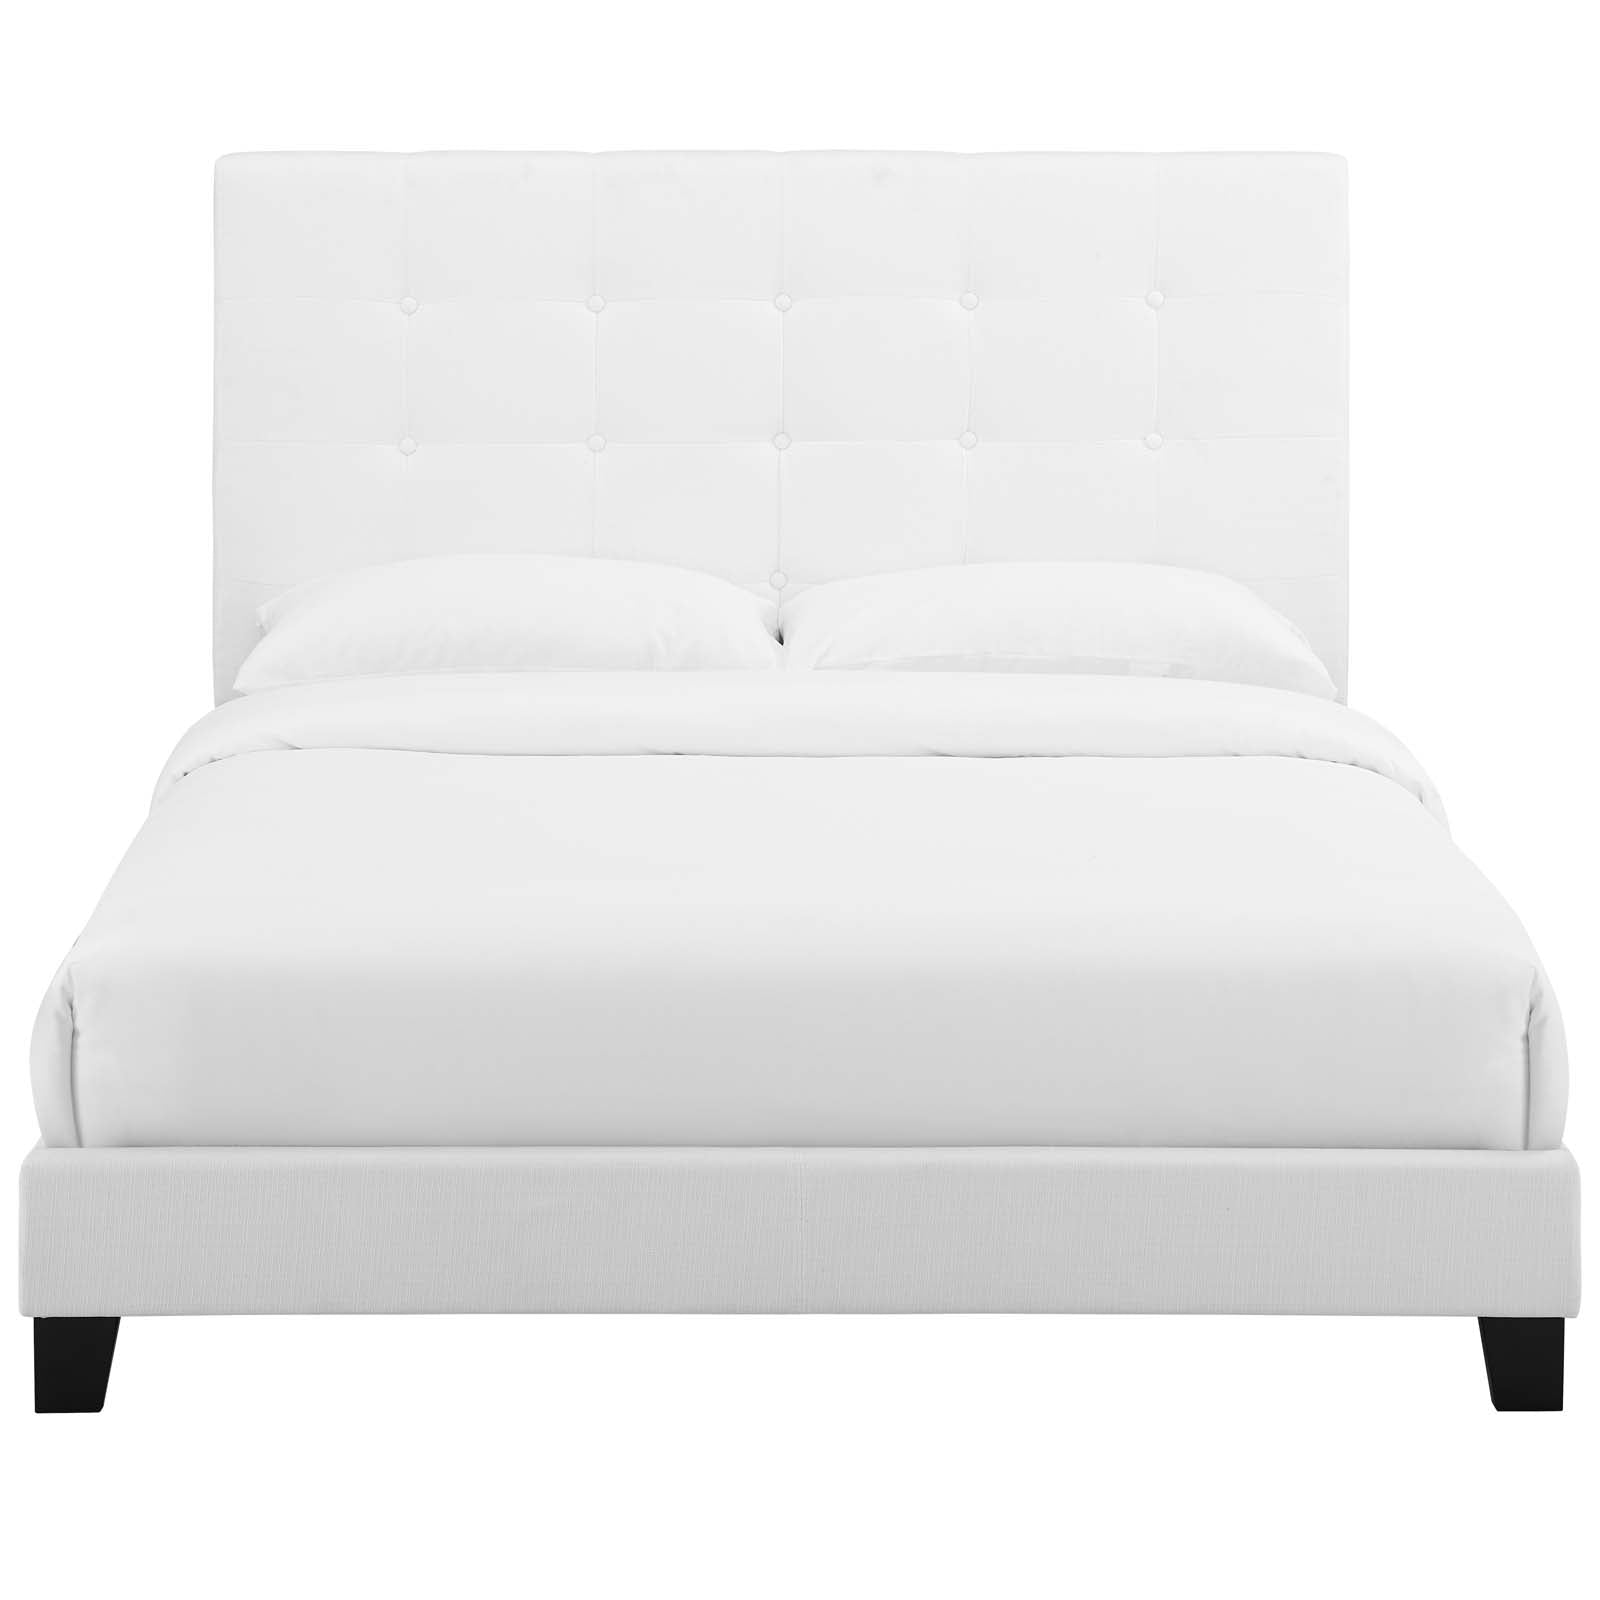 Modway Beds - Melanie Twin Tufted Button Upholstered Fabric Platform Bed White